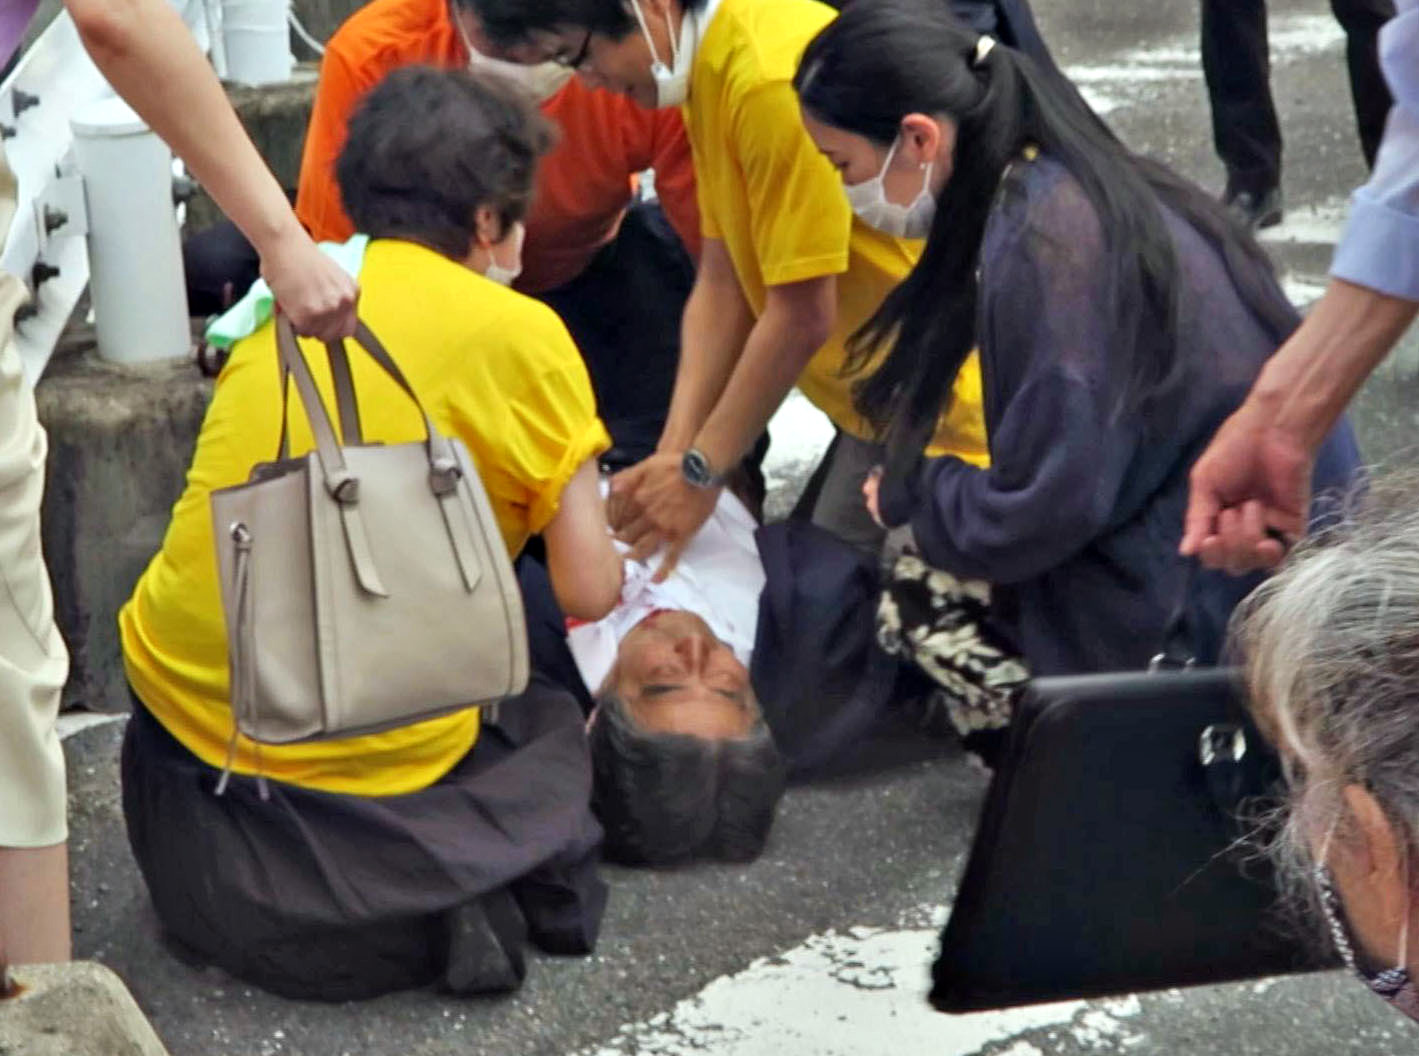 PHOTO: Former Japanese Prime Minister Shinzo Abe lies on the ground after being shot from behind by a man in Nara, western Japan, July 8, 2022. Abe was pronounced dead at a local hospital.